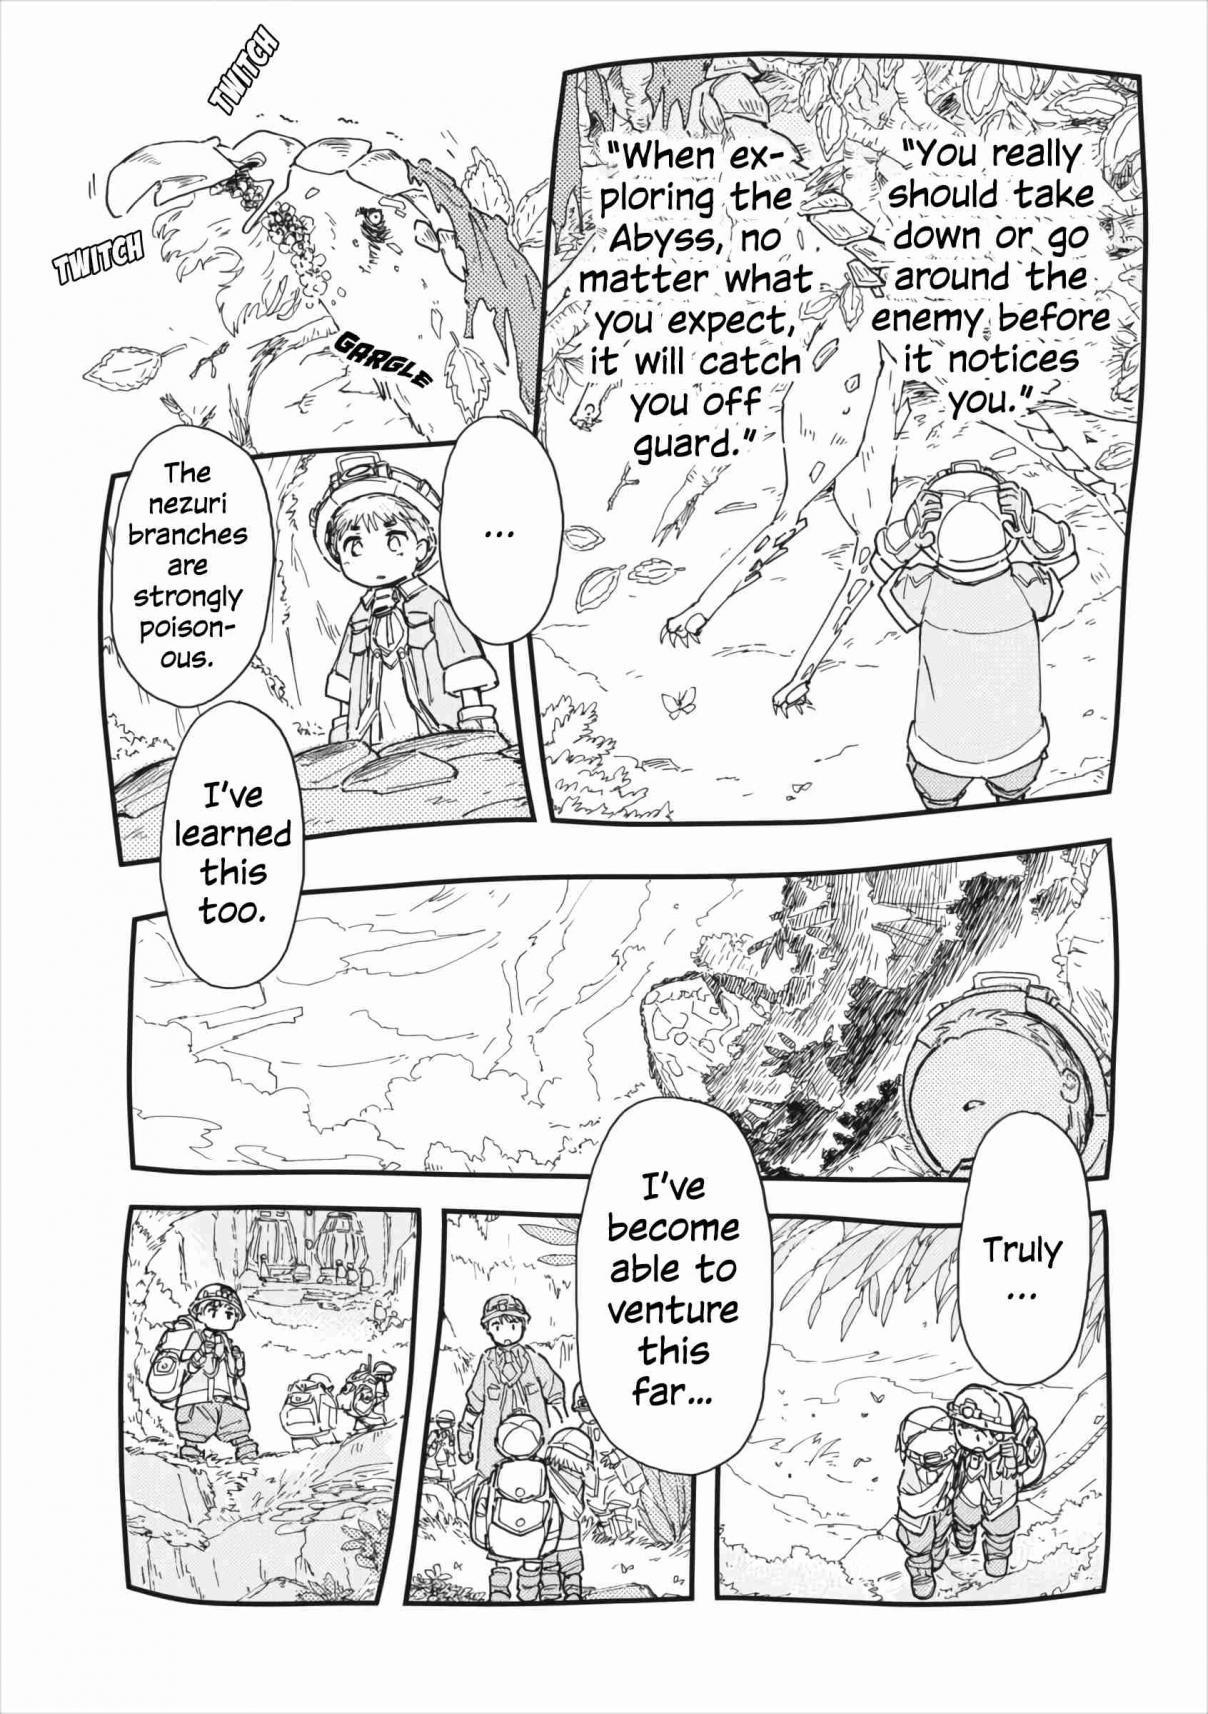 Made in Abyss Anthology Vol. 2 Ch. 6 Heartpounding! Riko's Creature of the Day (Imai Tetsuya)